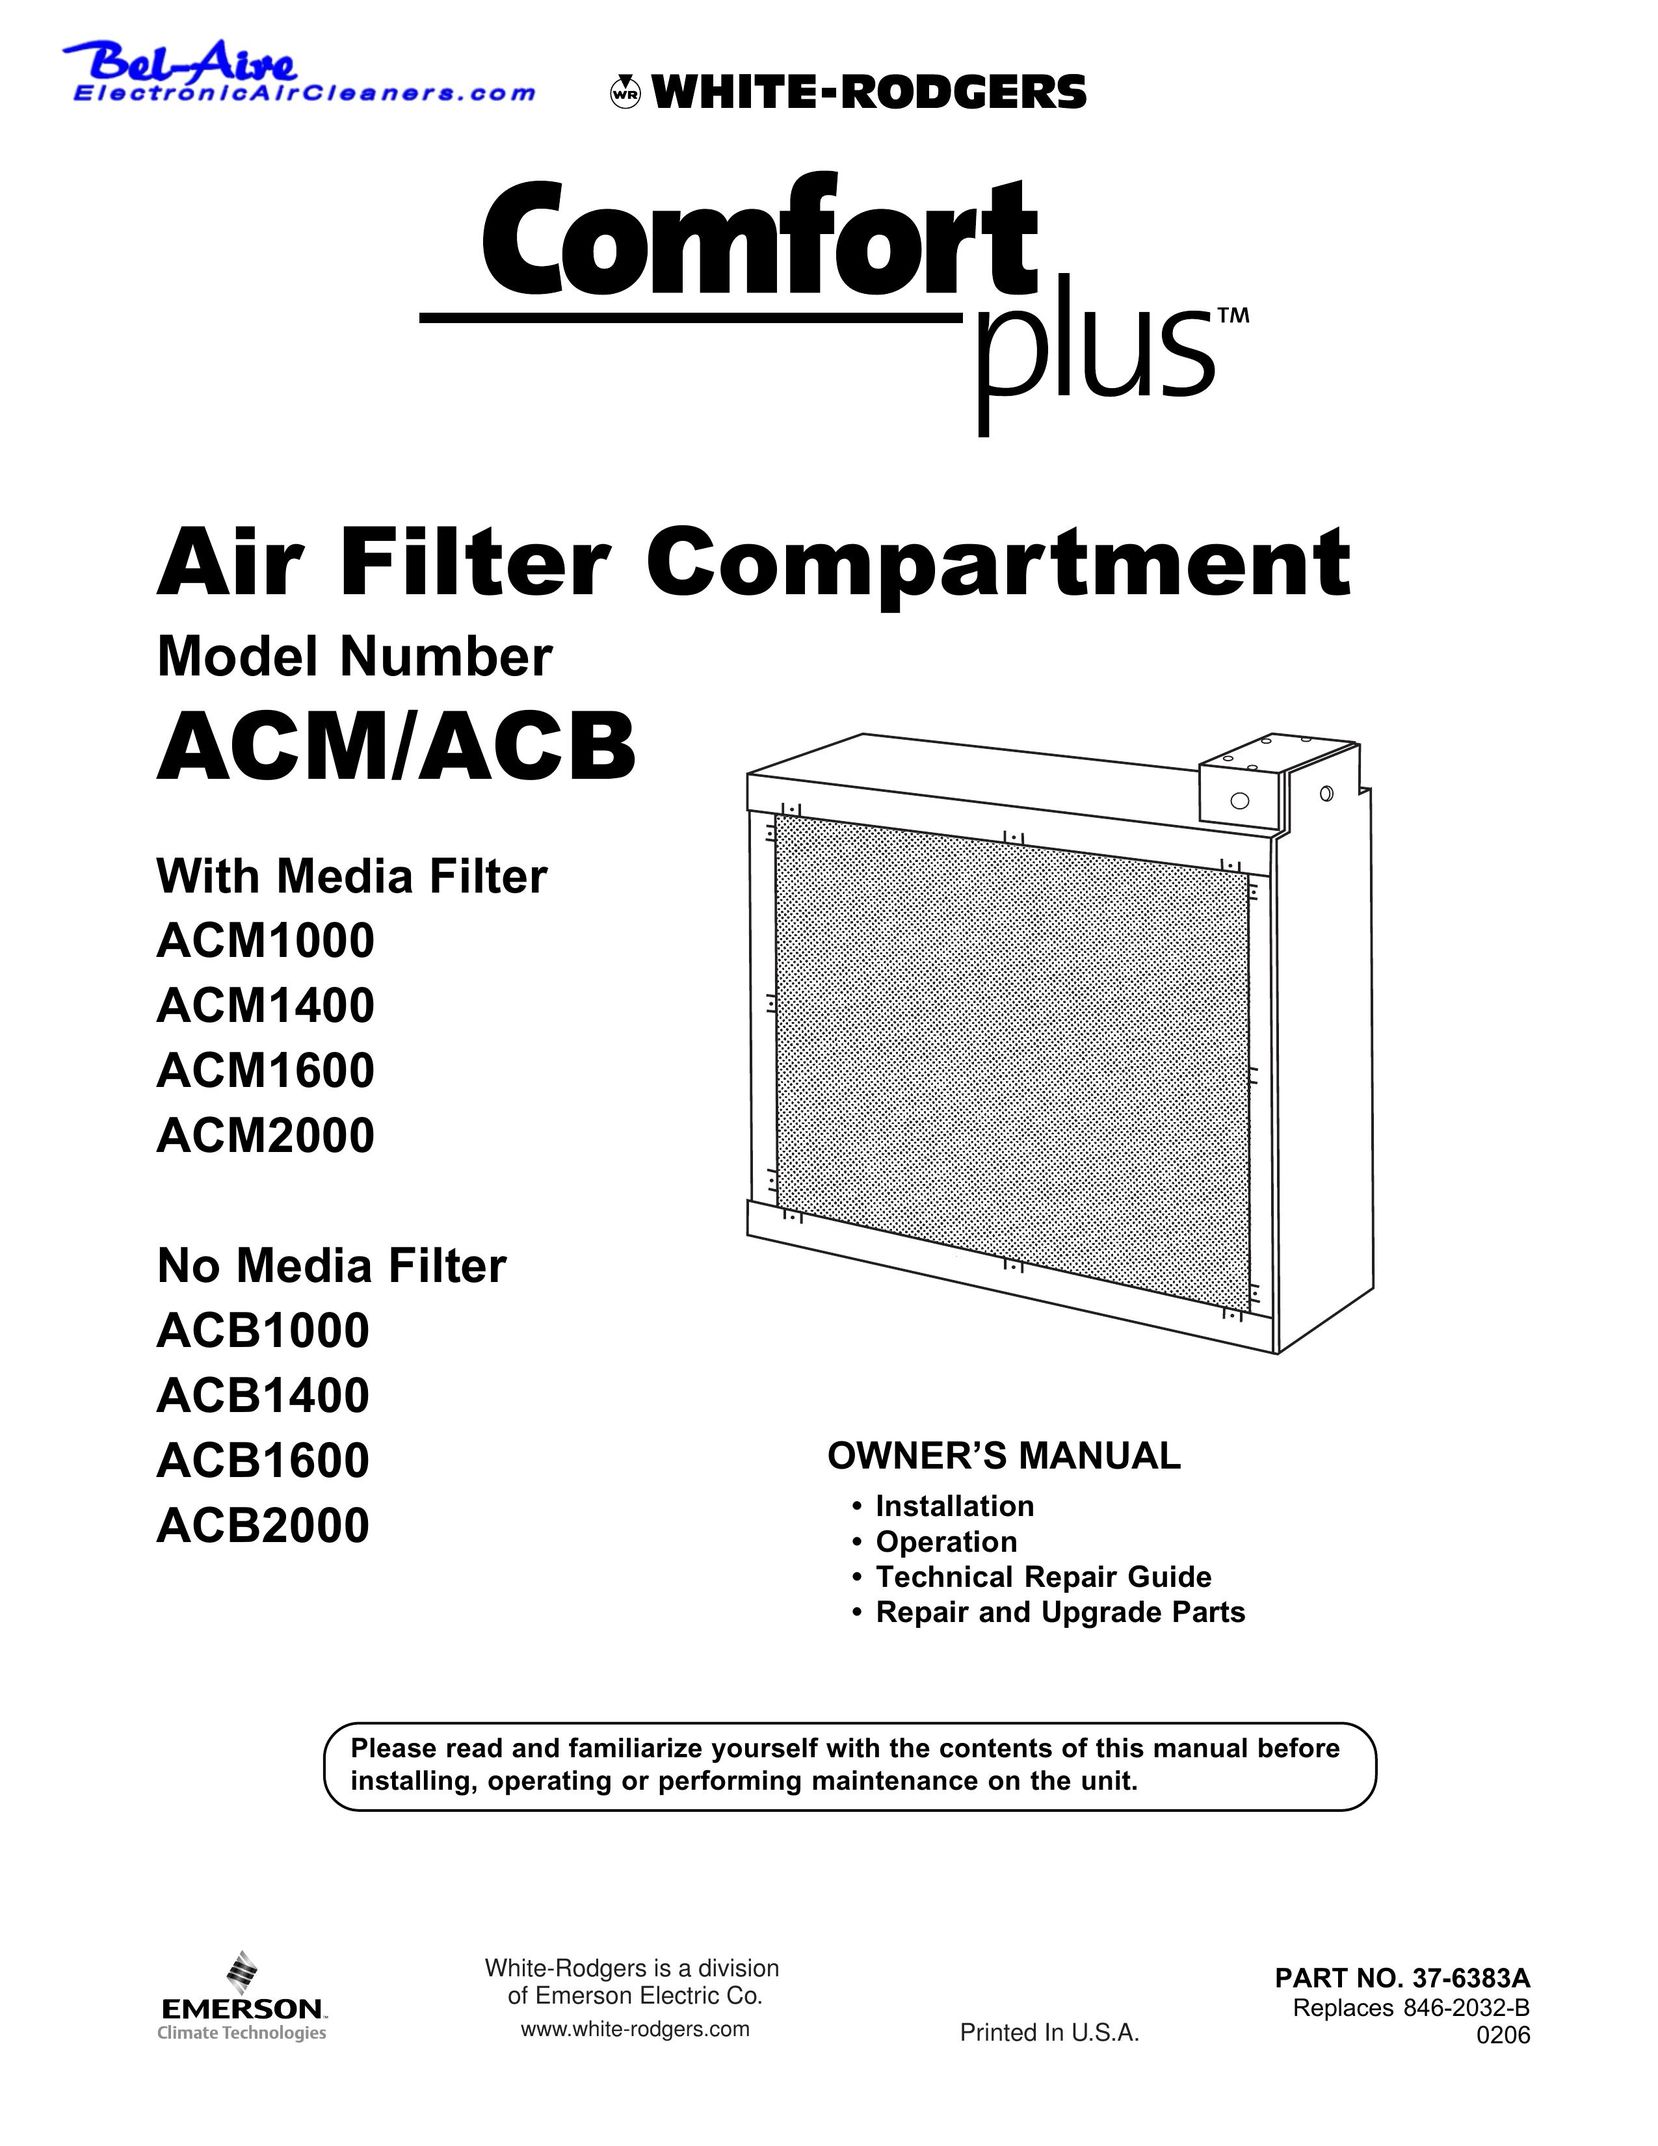 White Rodgers ACM1000 Air Cleaner User Manual